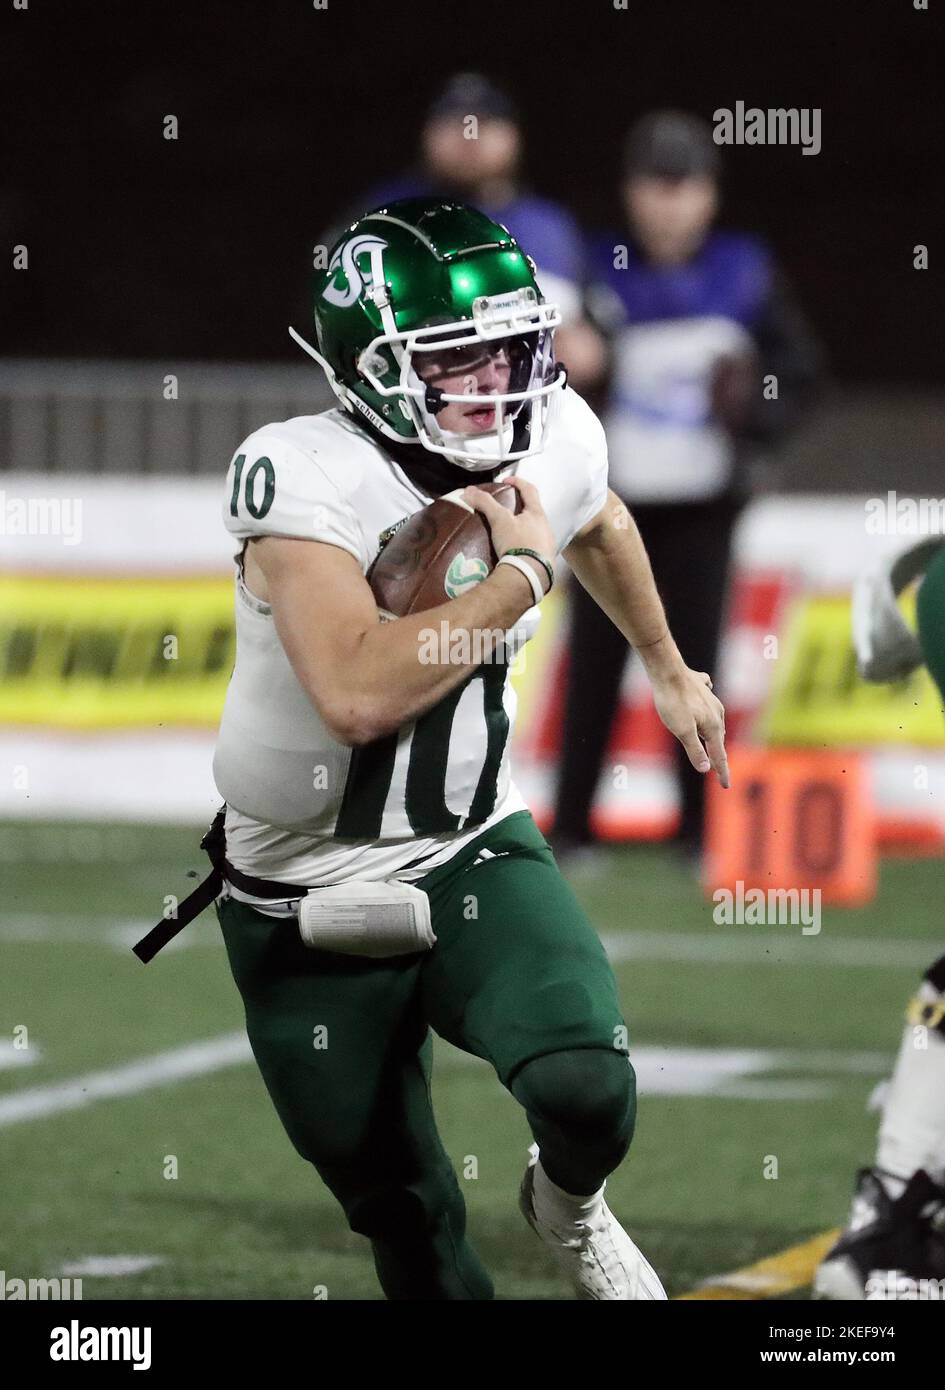 Hilsboro Stadium, Hillsboro, OR, USA. 11th Nov, 2022. Sacramento State Hornets quarterback Asher O'Hara (10) competes in the NCAA football game between the Hornets of Sac State and the Portland State Vikings at Hilsboro Stadium, Hillsboro, OR. Larry C. Lawson/CSM (Cal Sport Media via AP Images). Credit: csm/Alamy Live News Stock Photo